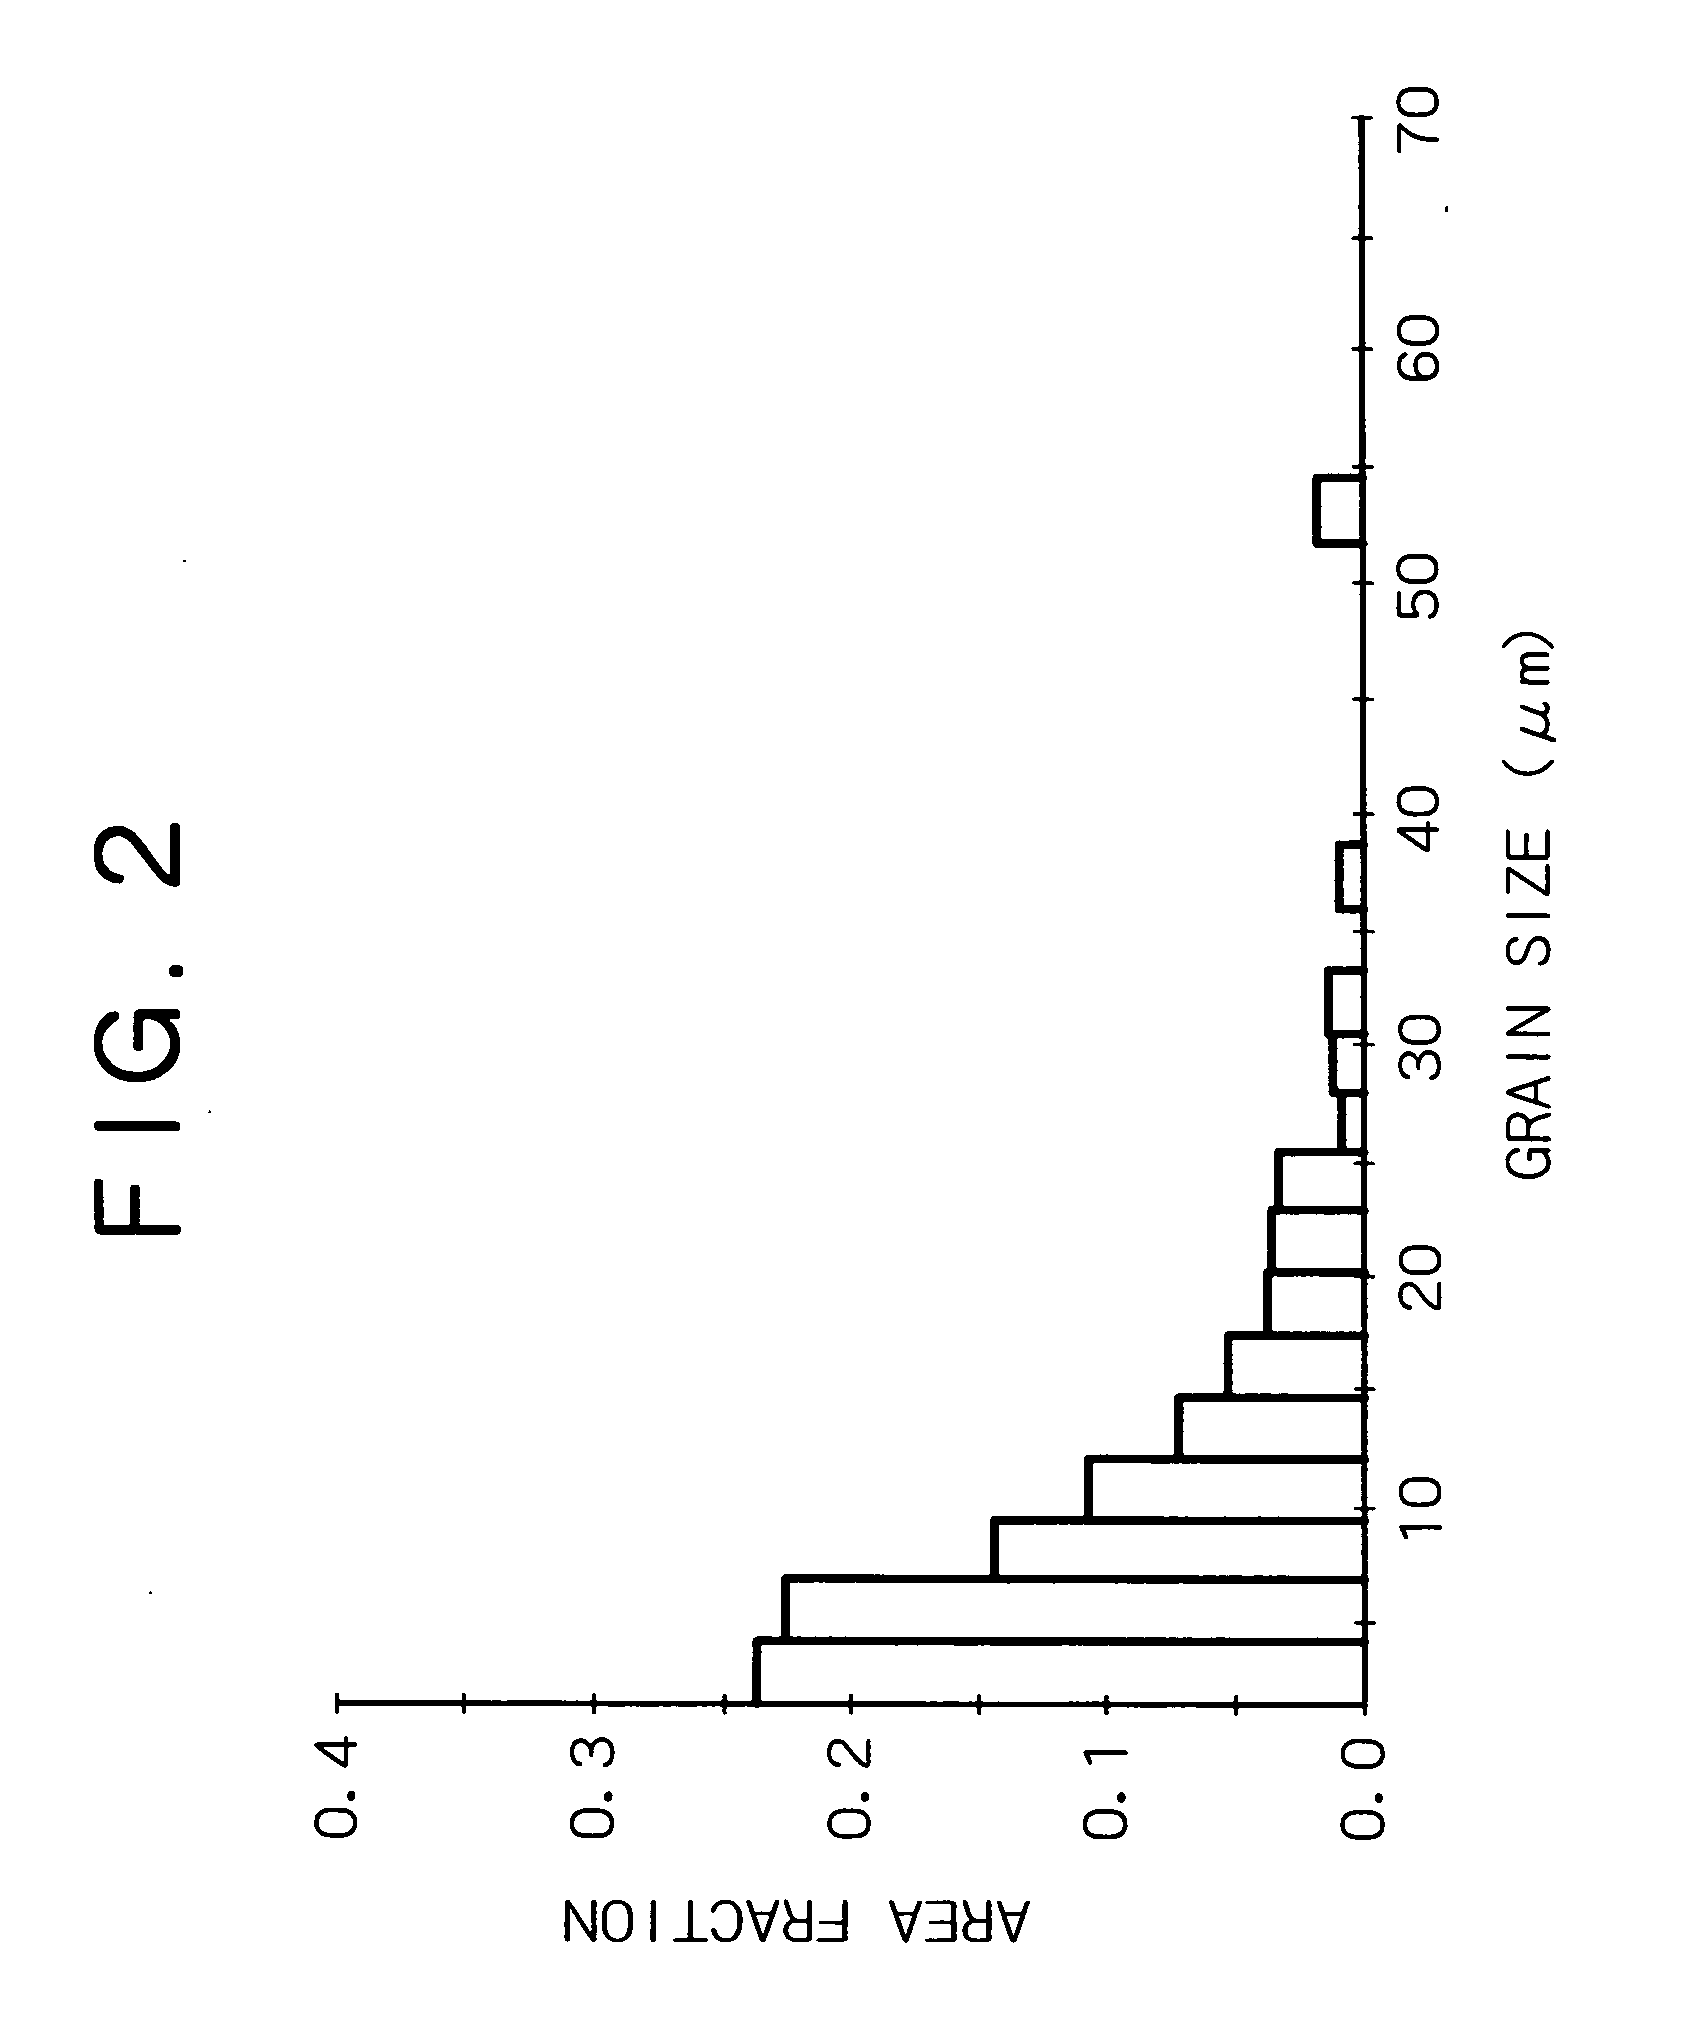 Softening-resistant copper alloy and method of forming sheet of the same